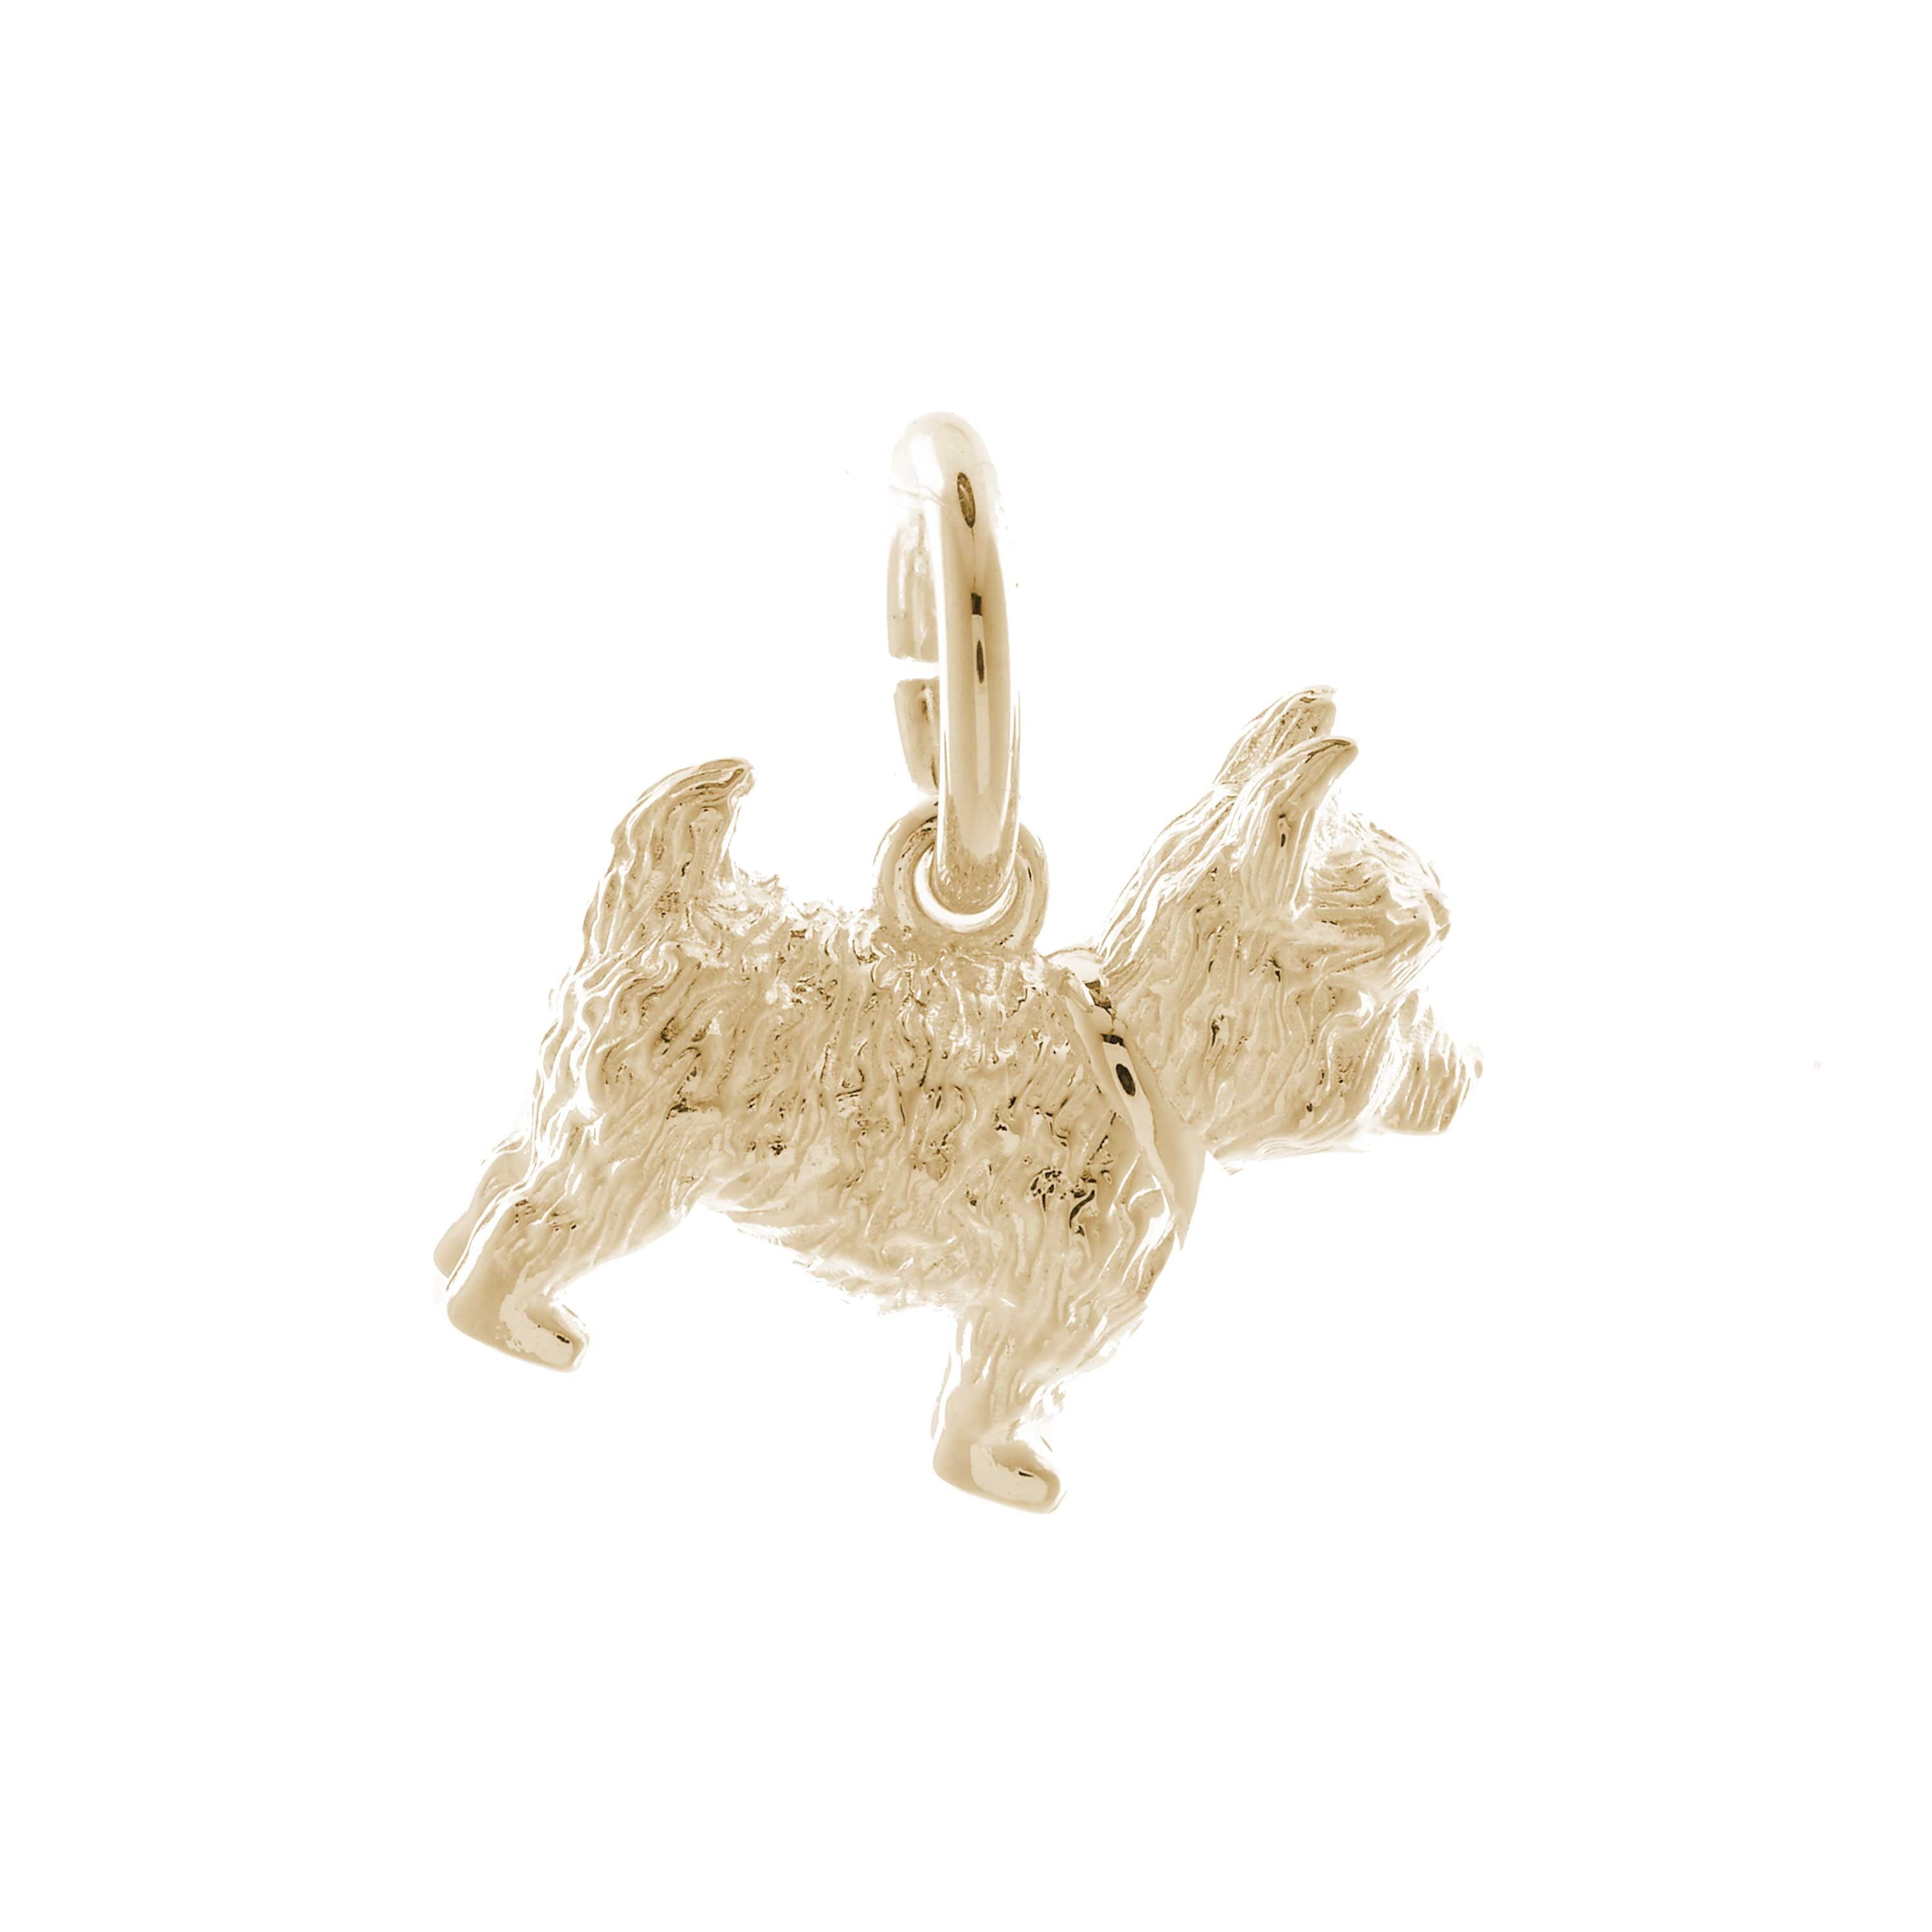 Solid 9ct gold Westie charm with tiny bandana (optional), perfect for a charm bracelet or necklace.